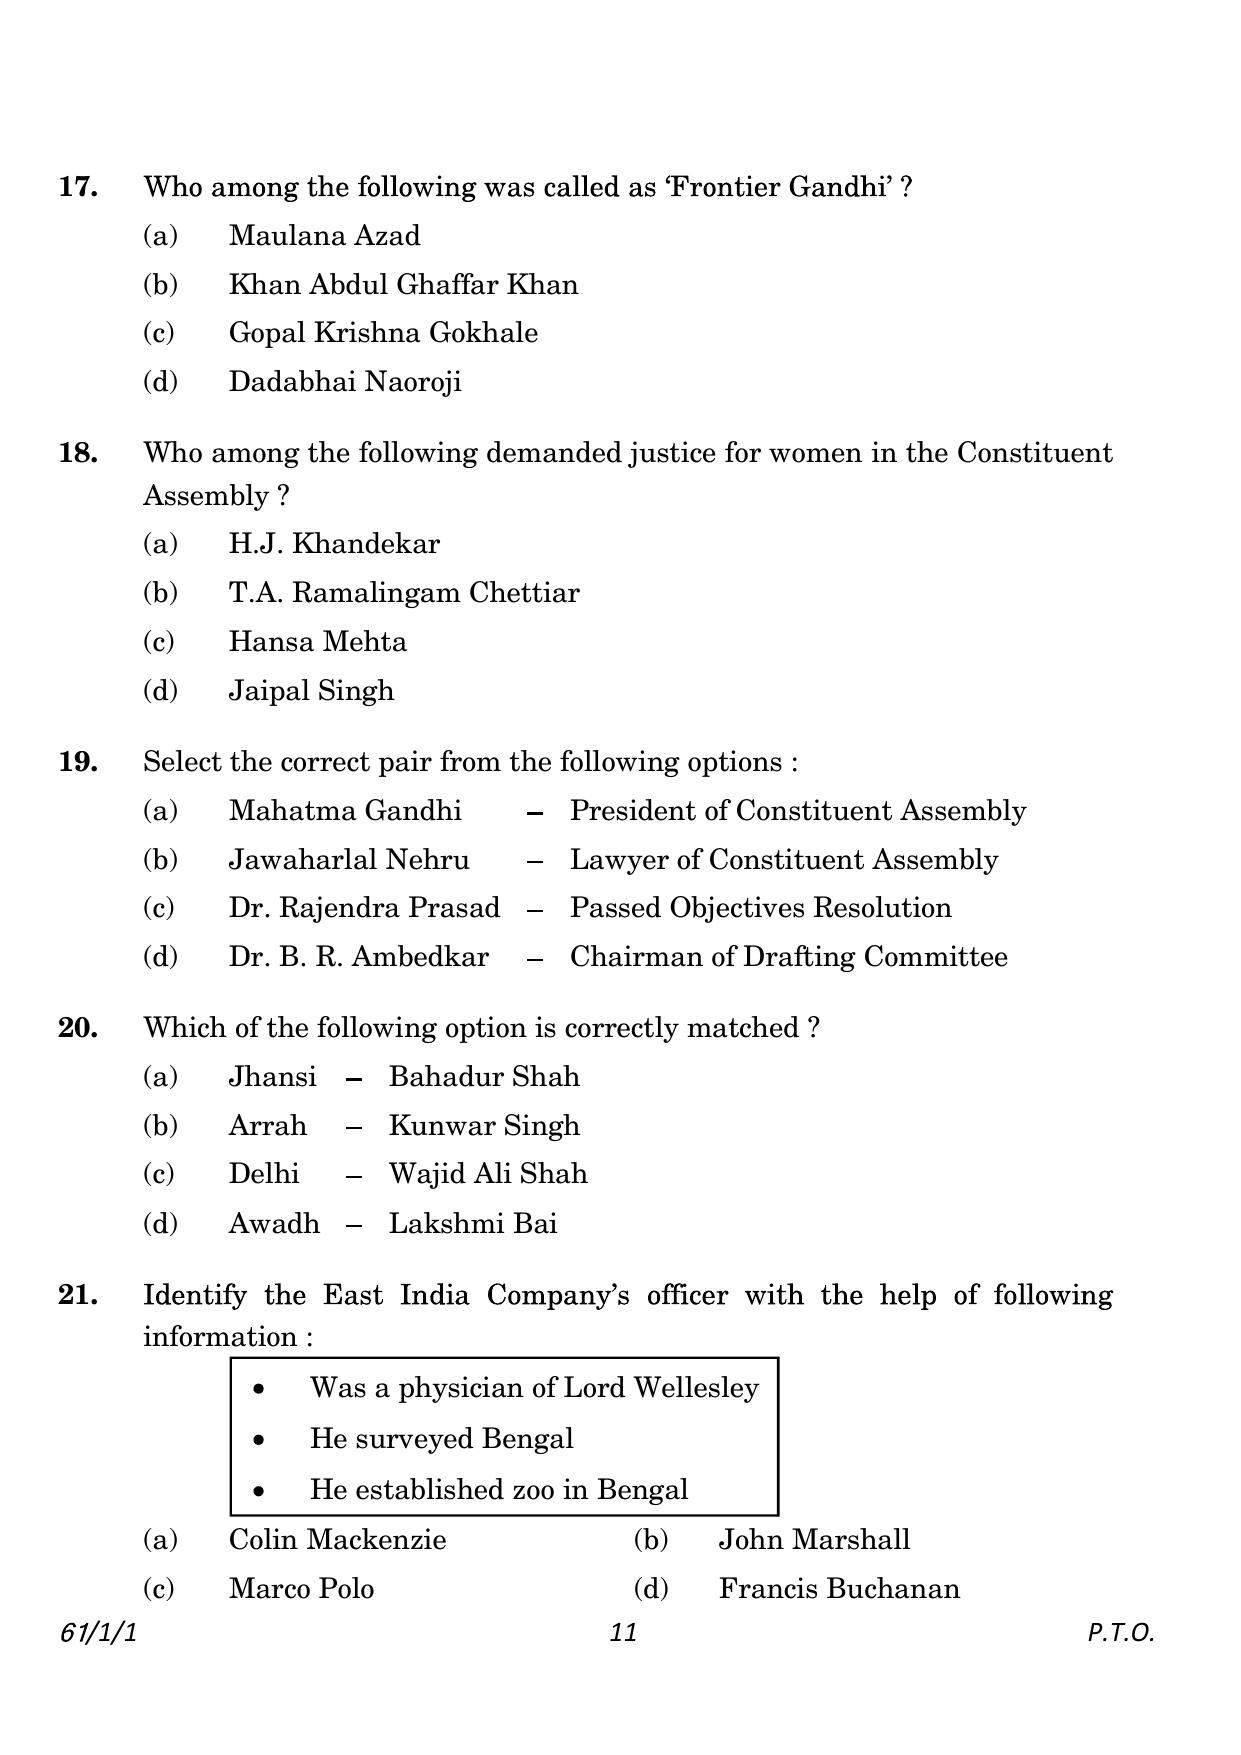 CBSE Class 12 61-1-1 History 2023 Question Paper - Page 11